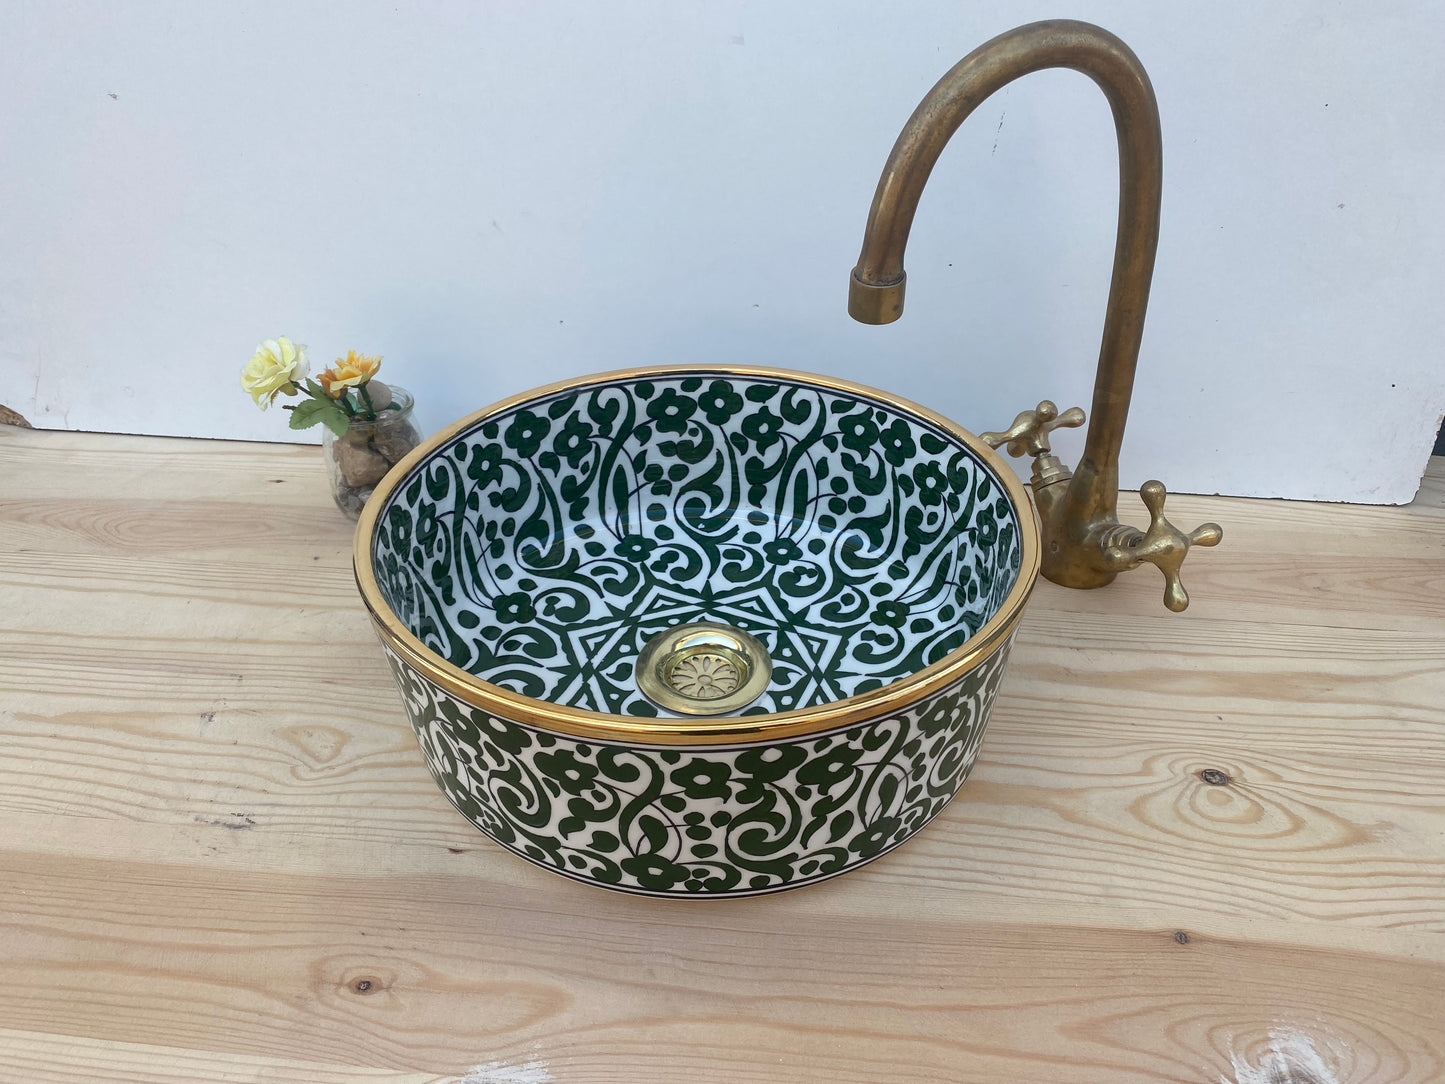 14k gold Green Bathroom vessel sink made from ceramic 100% handmade hand painted, ceramic sink decor built with mid century modern styling